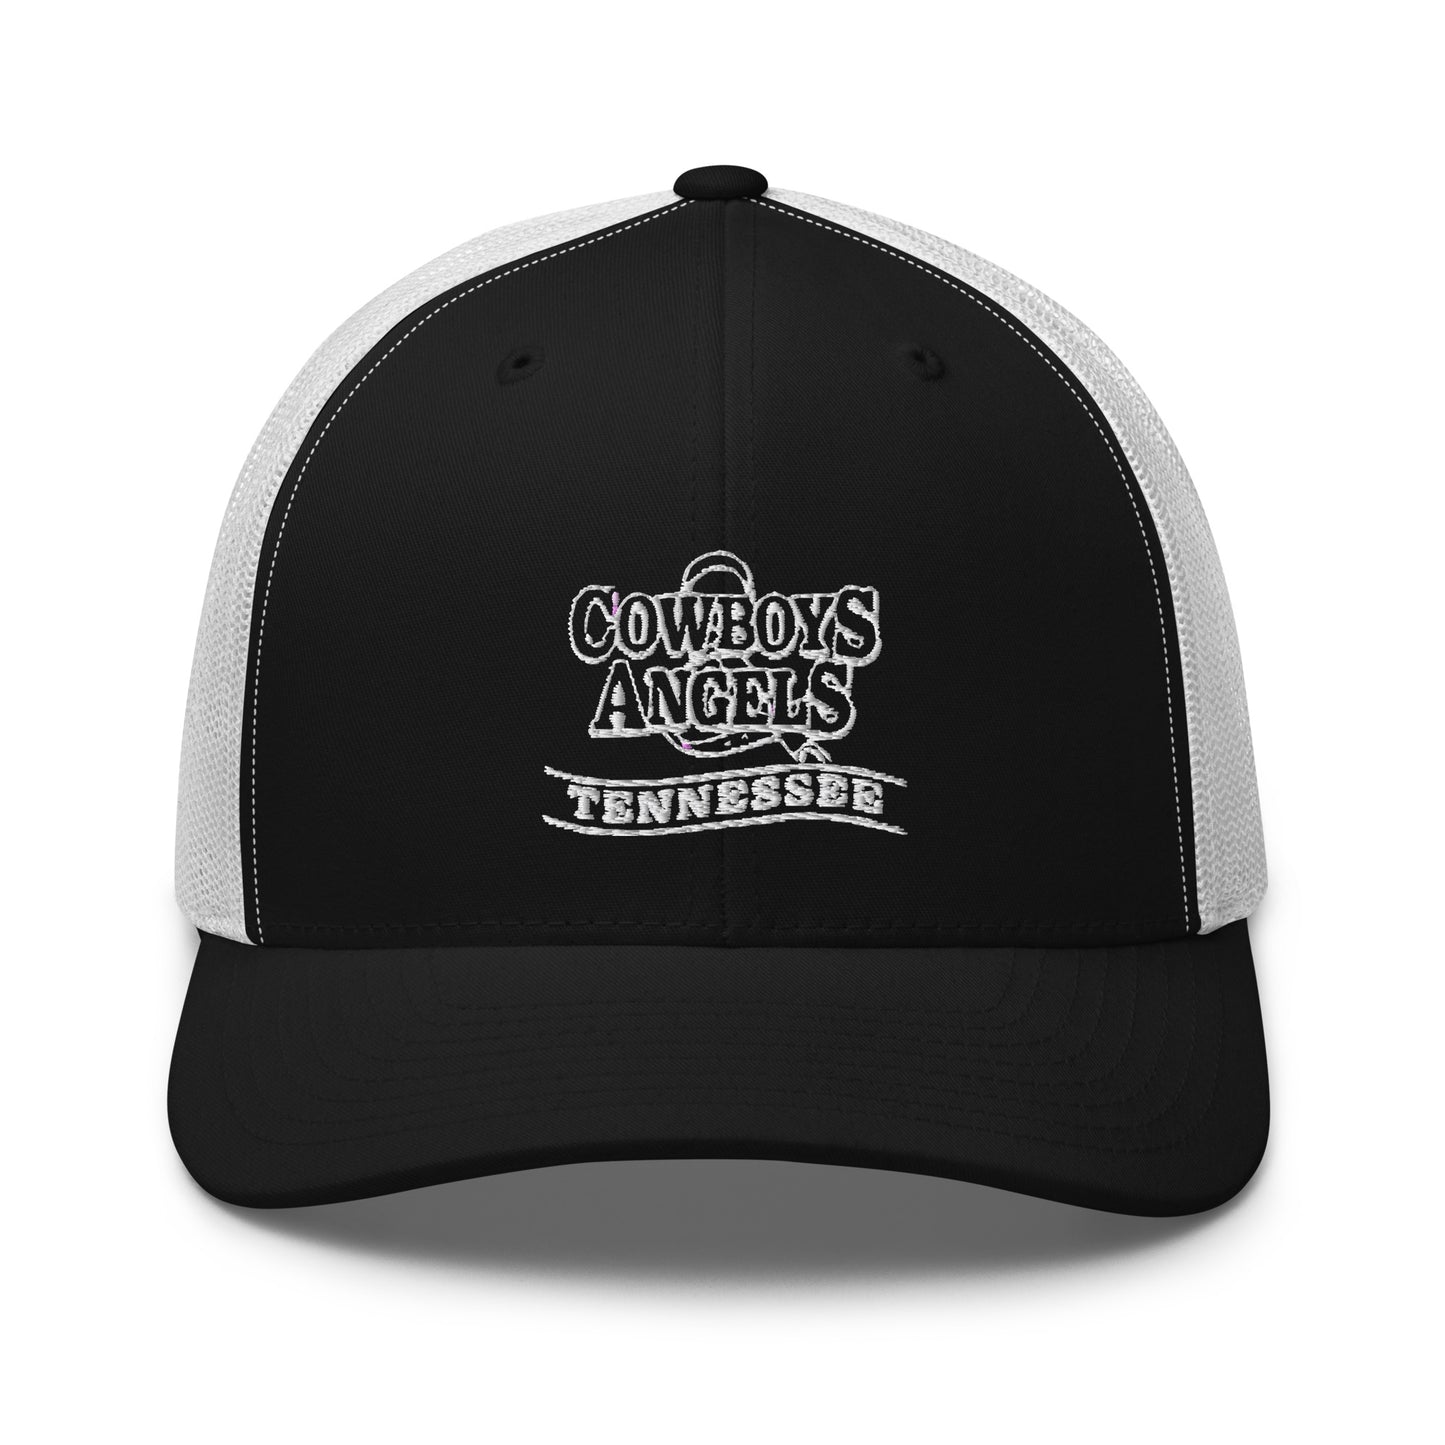 Tennessee Trucker Cap (Black with White Mesh)